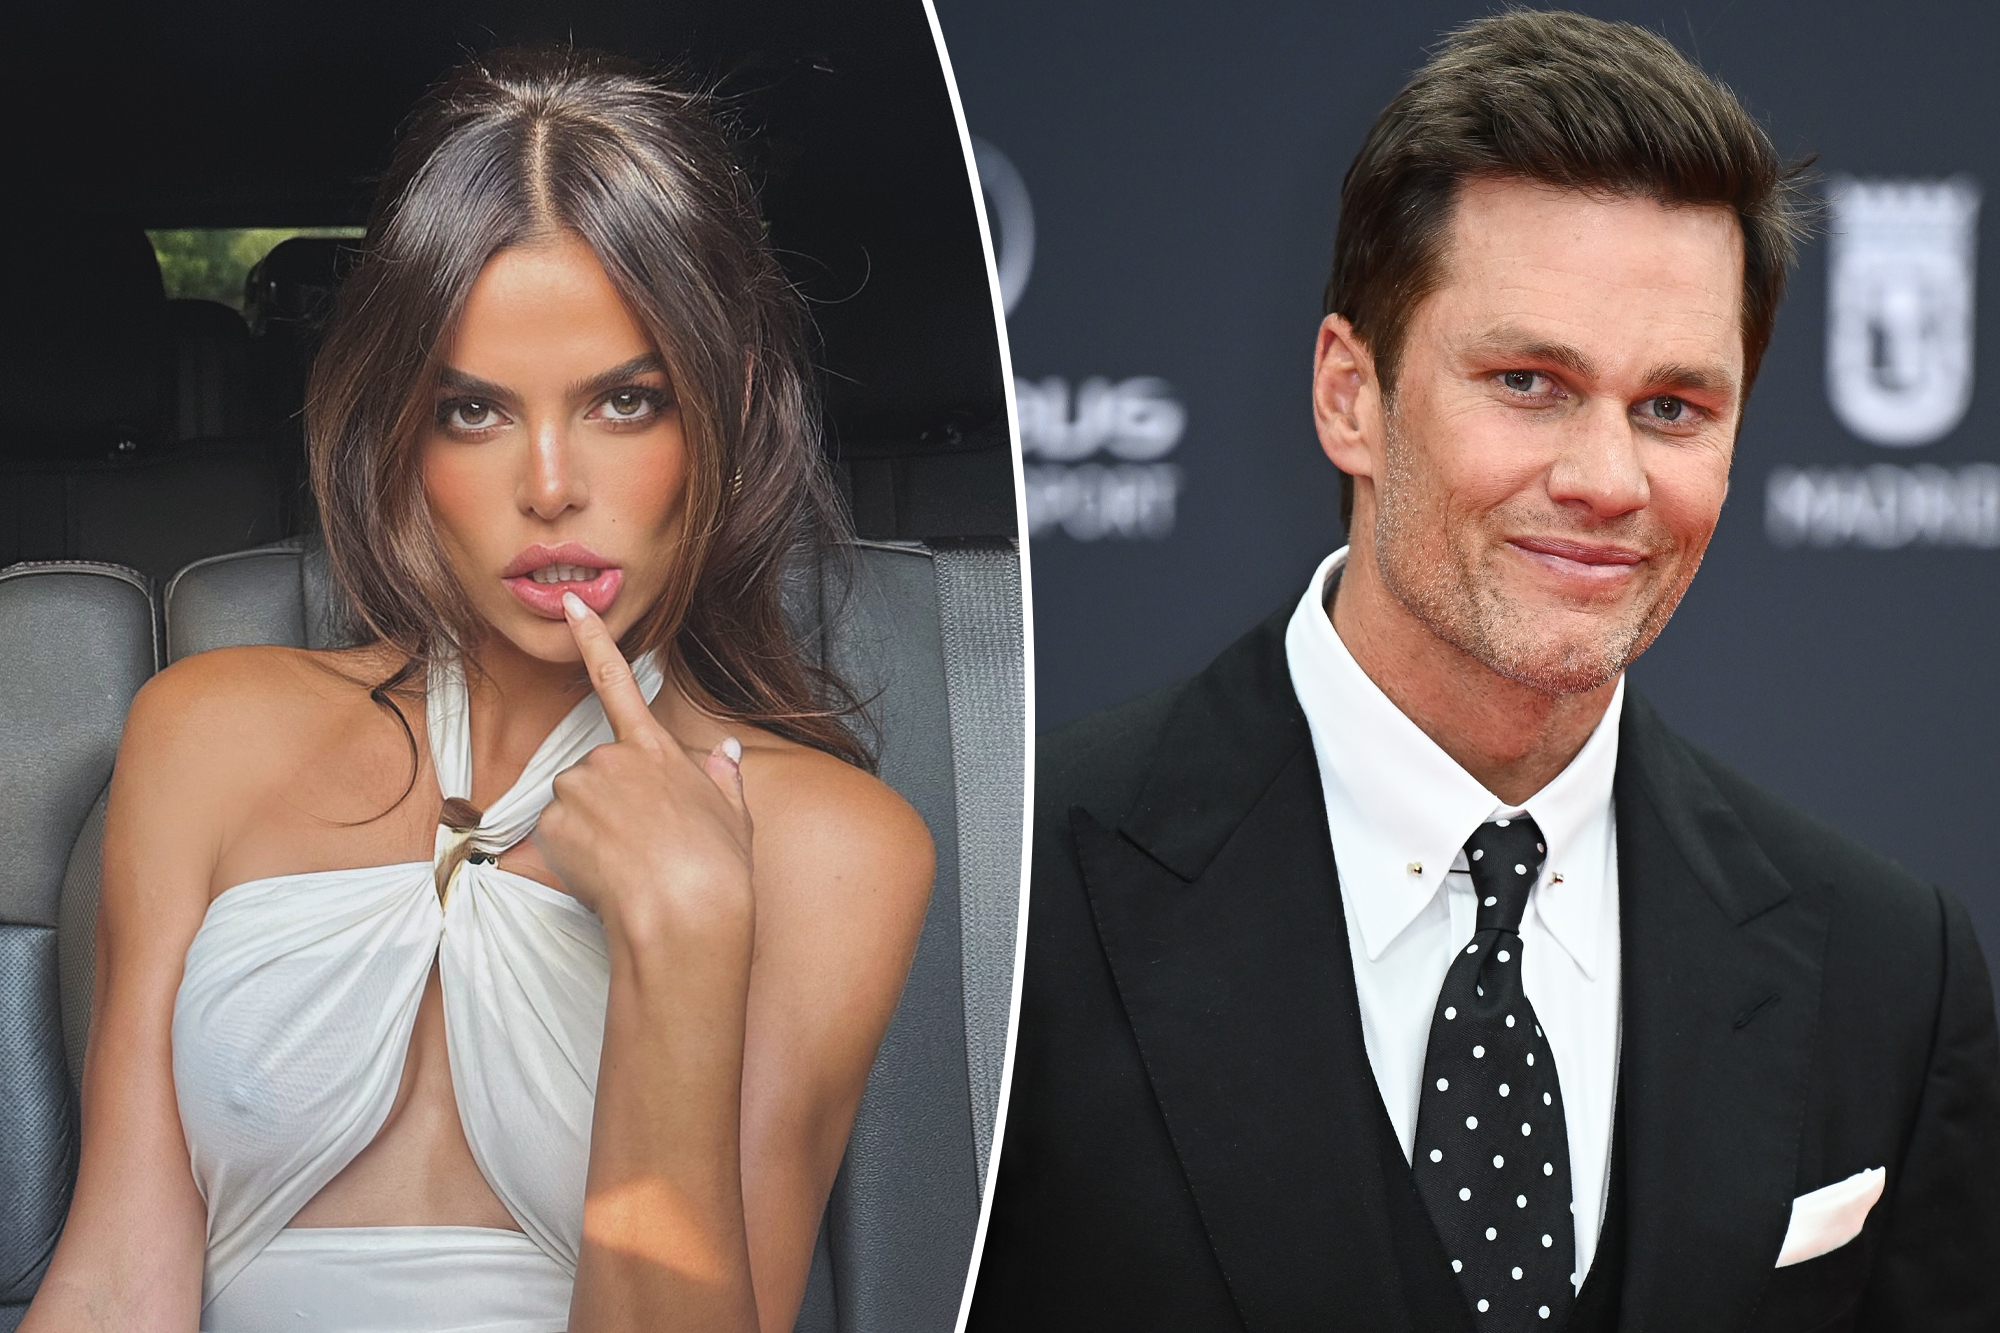 Tom Brady's New Flame: Meet the Stunning Sports Illustrated Model He's Casually Dating!